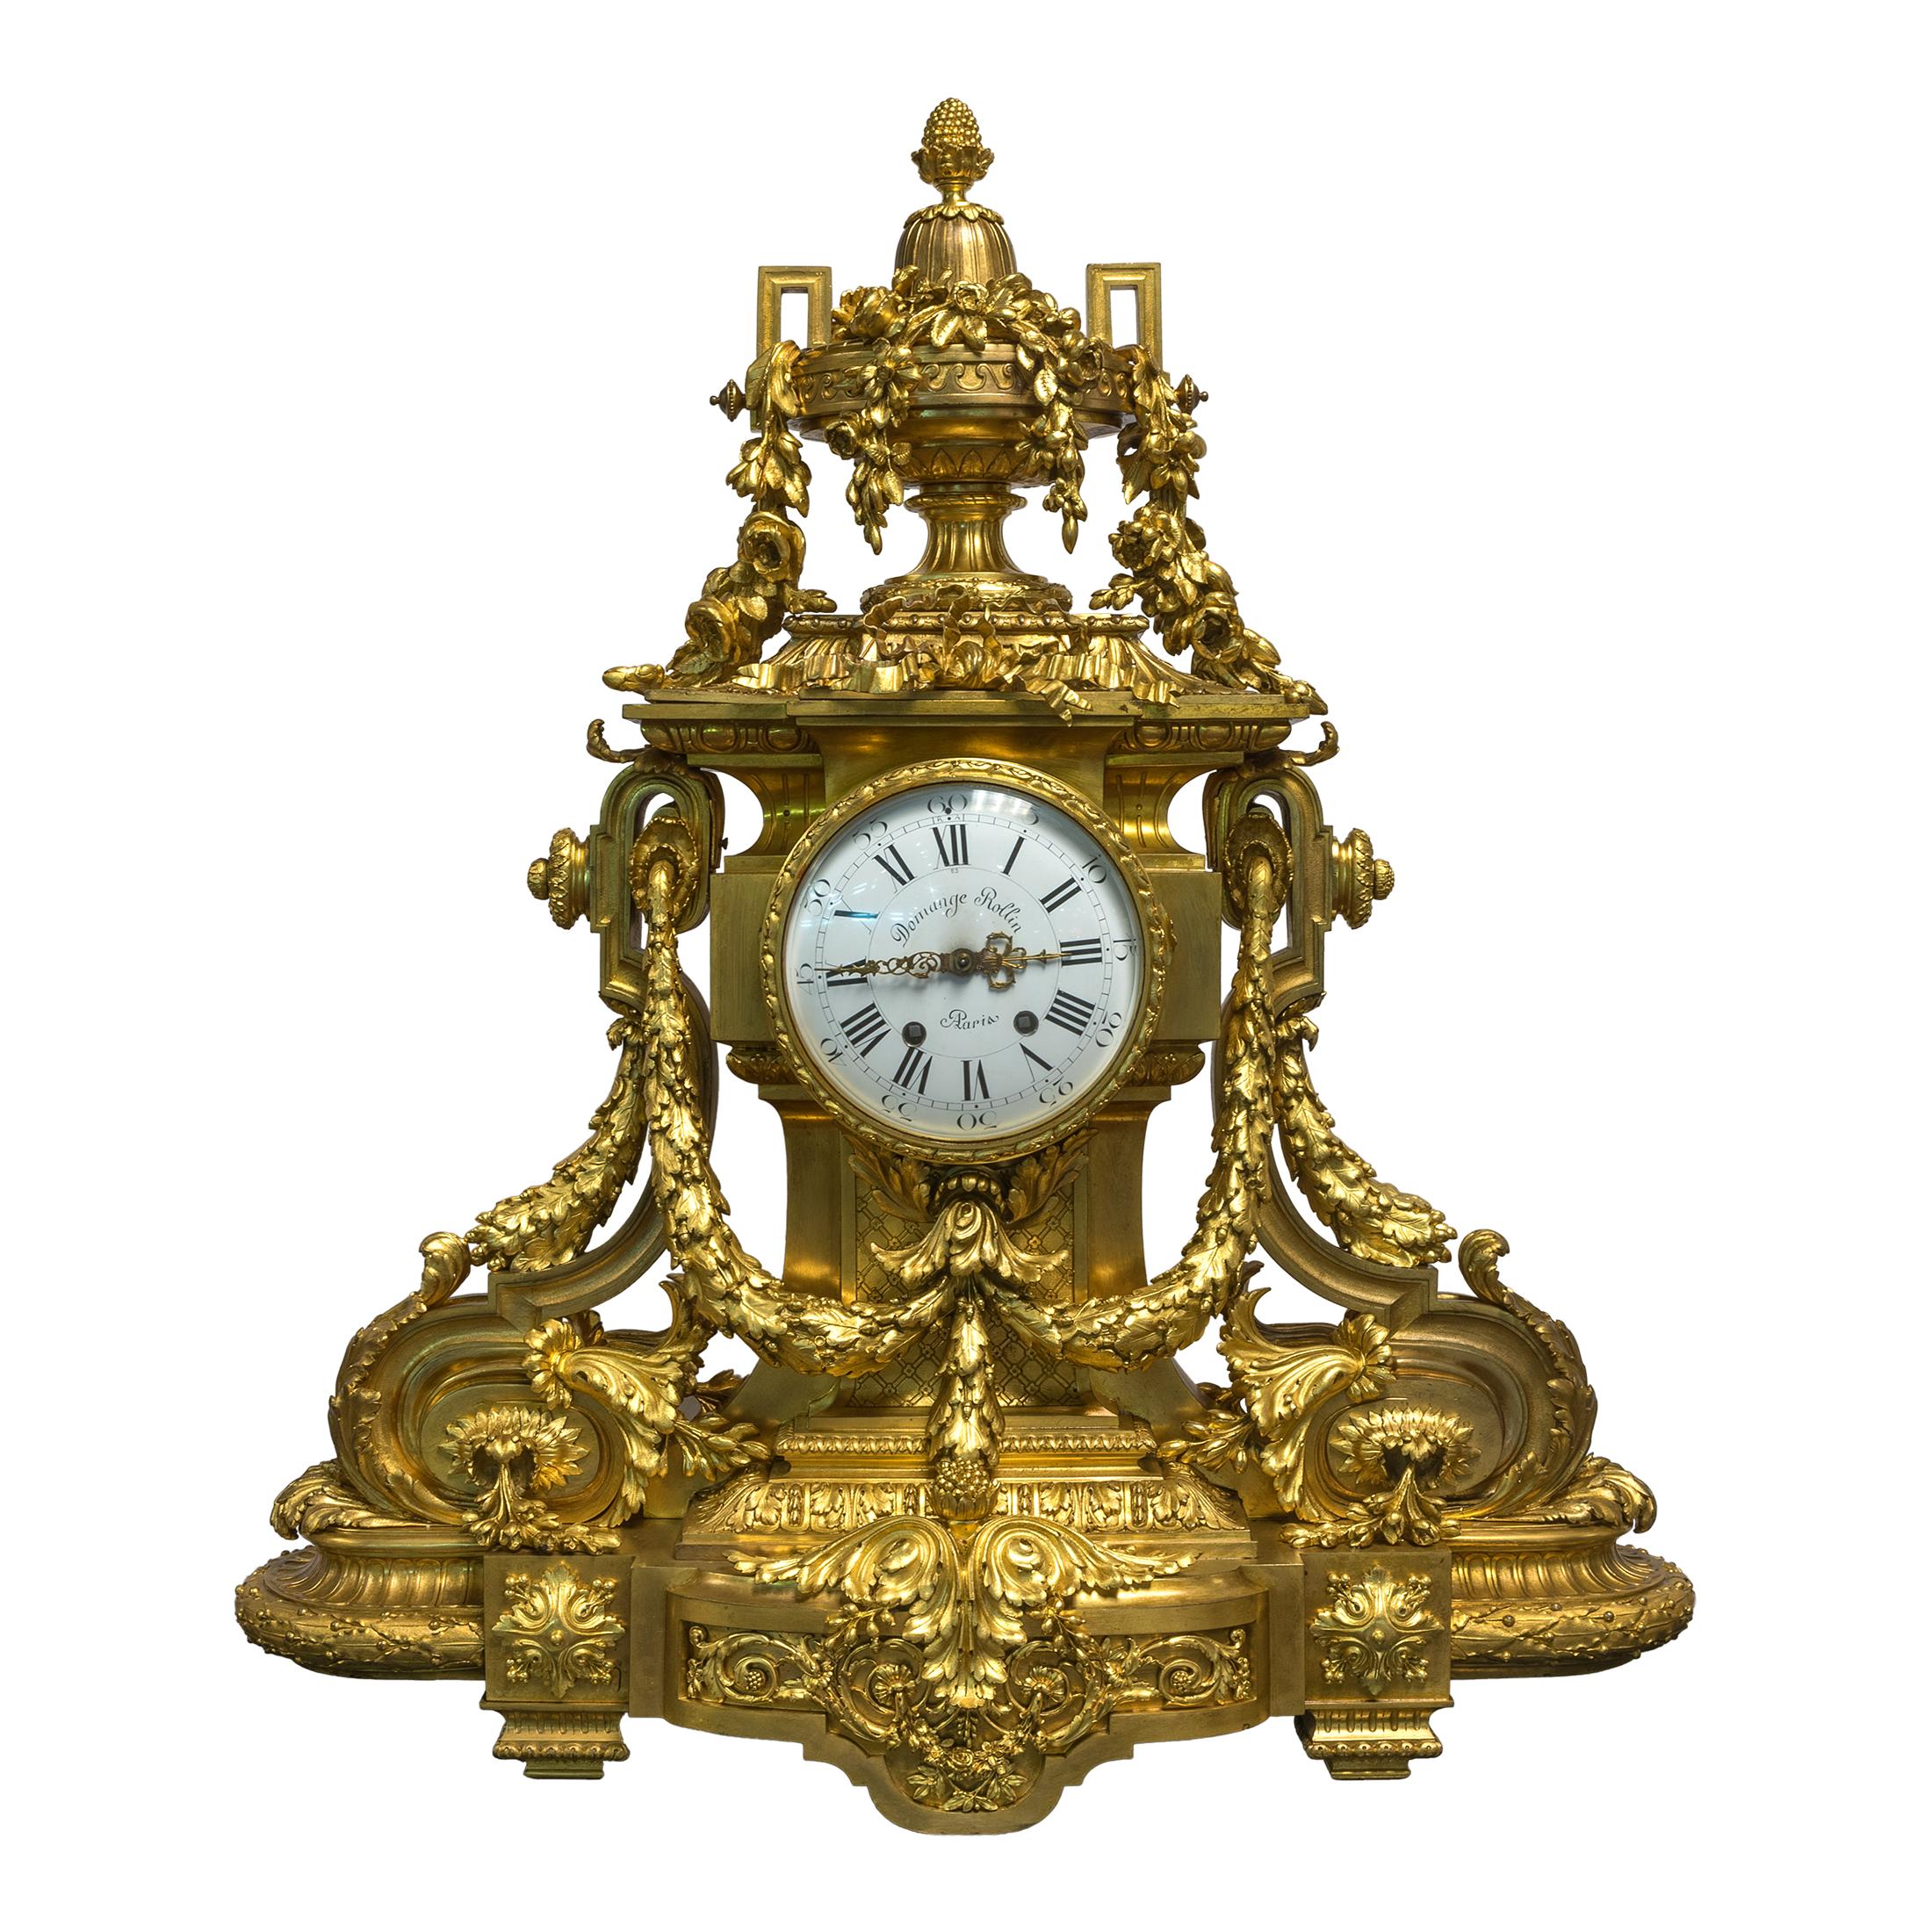 A fine quality monumental gilt bronze three-piece clock garniture.
Comprising a fine quality large gilt bronze eight-arm figural rococo candelabra and a mantel clock, the black and white enameled dial inscribed Domange Rollin Paris. 

Origin: